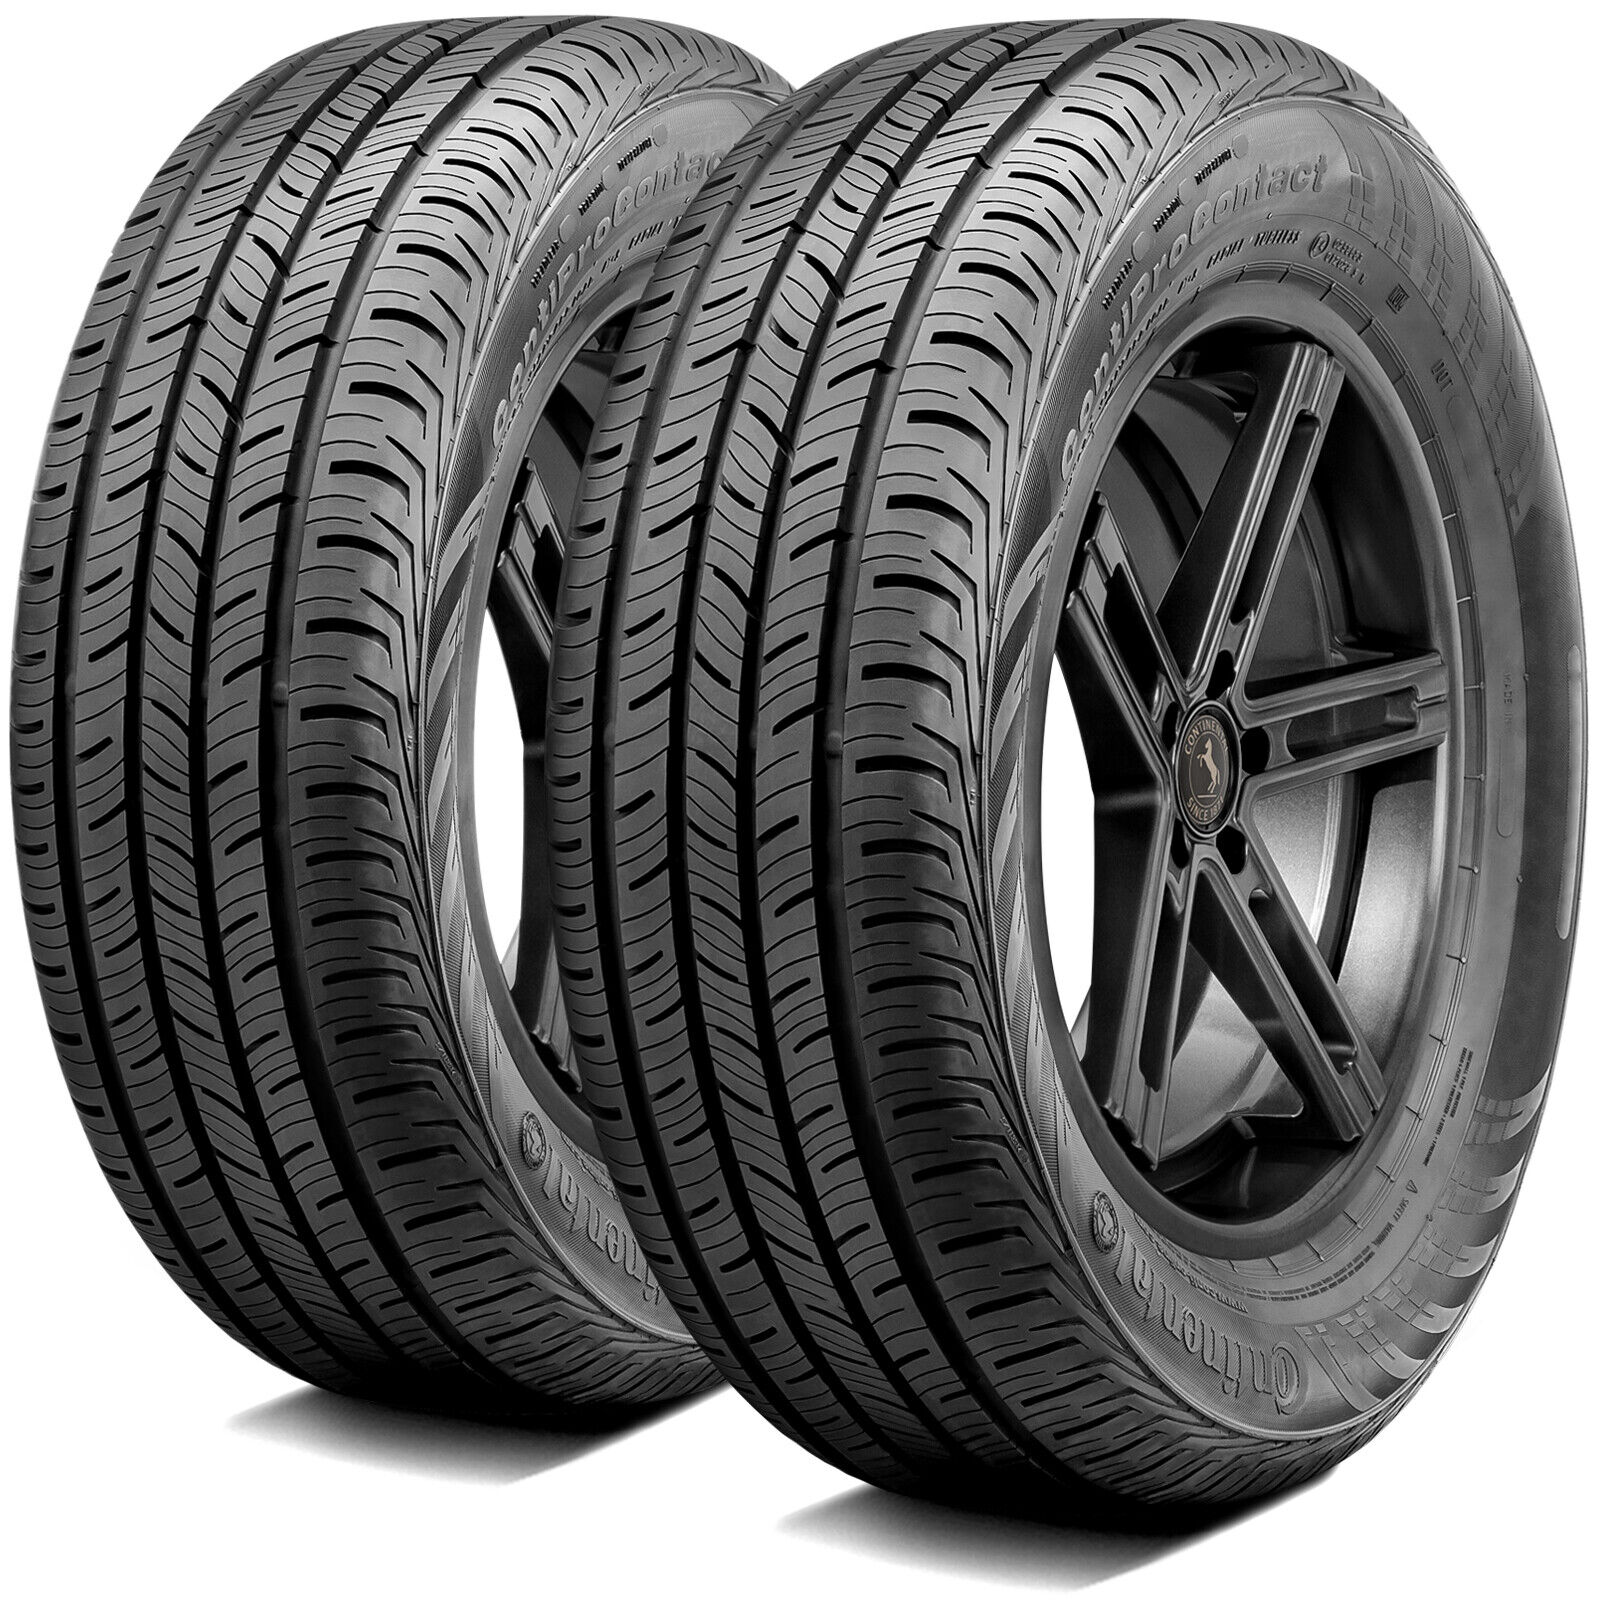 2 Tires Continental ContiProContact 215/55R16 97H XL A/S All Season TakeOff